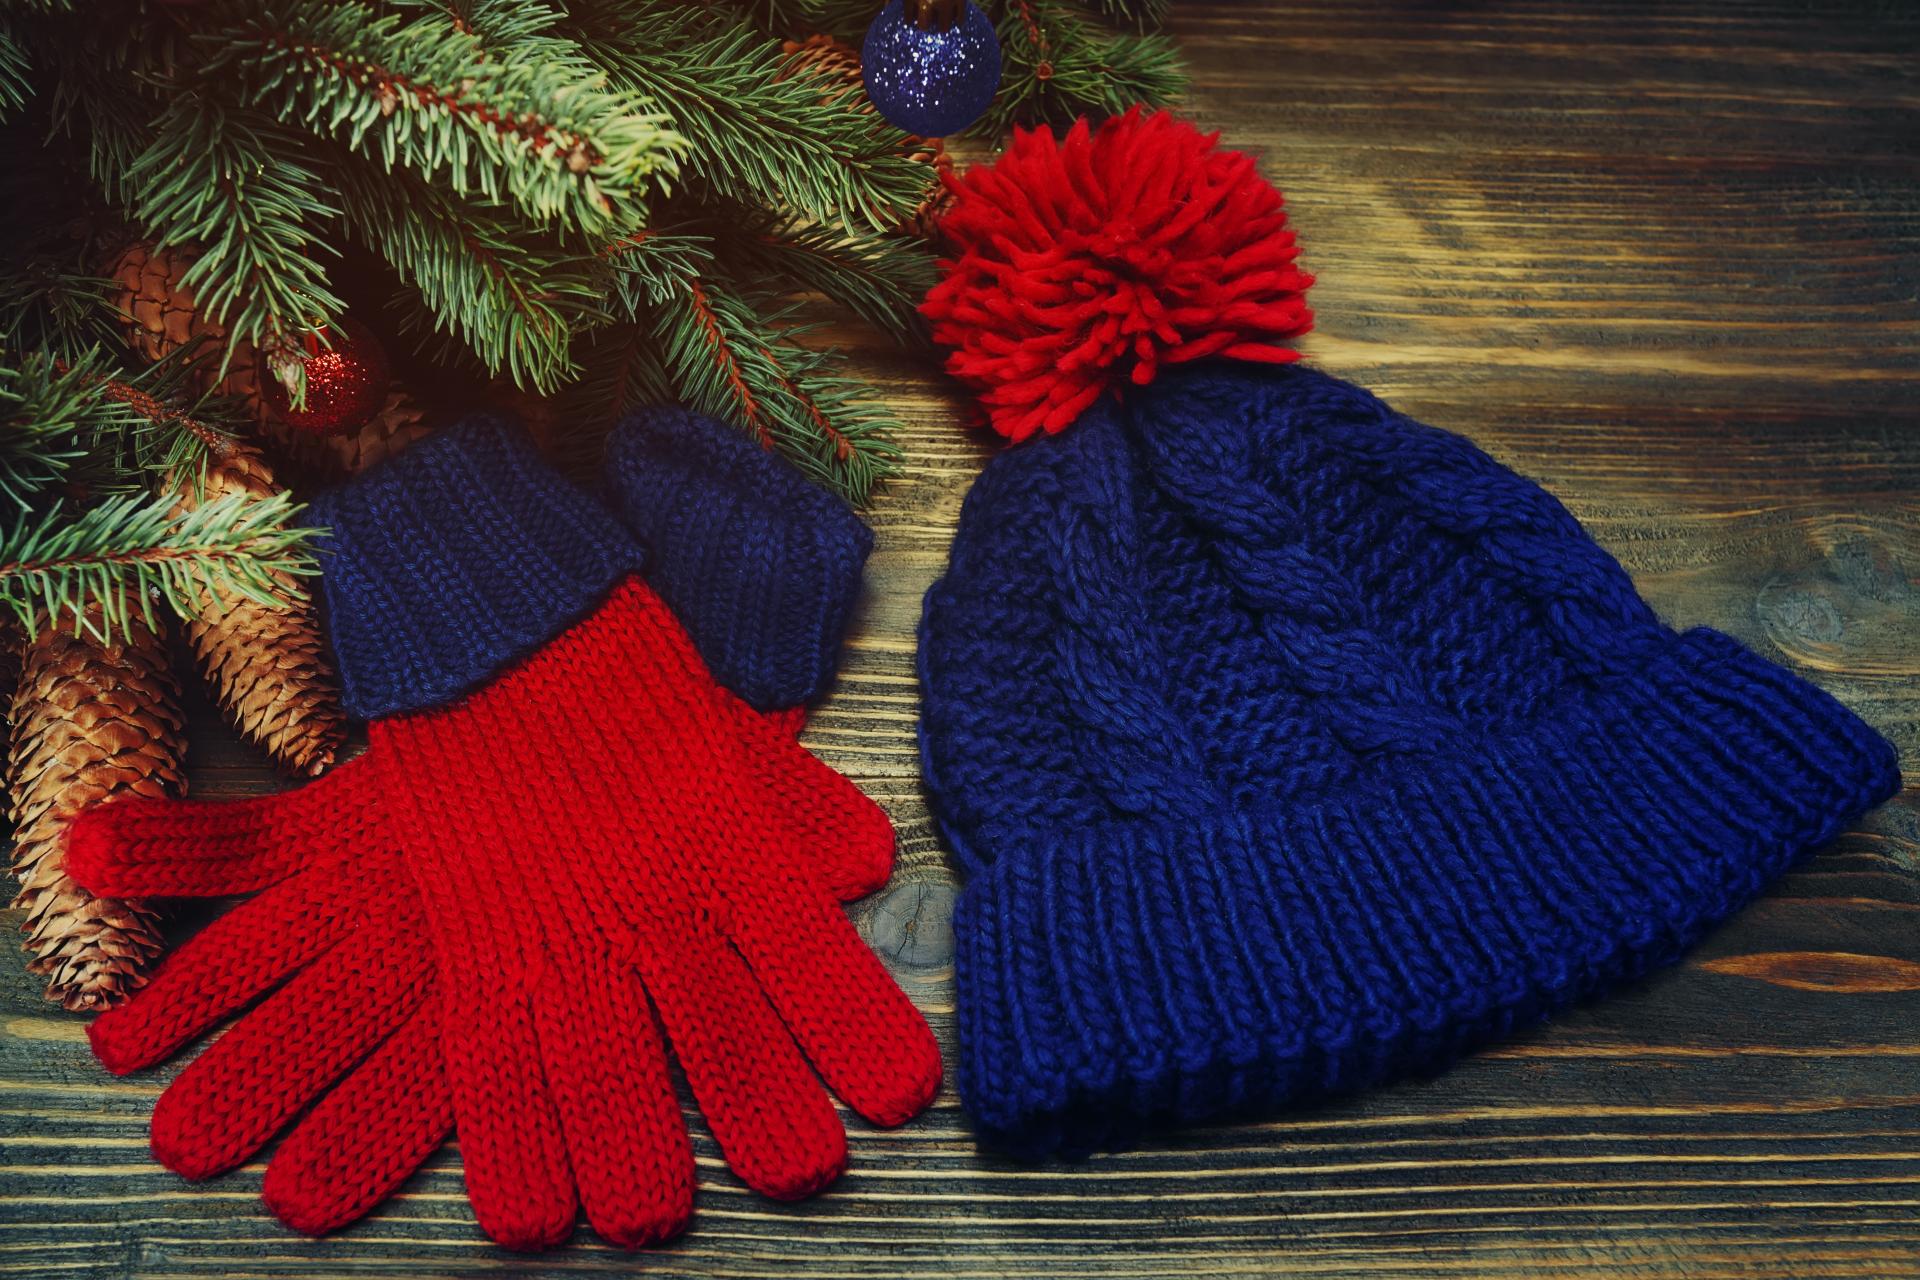 Red & Blue winter cap and gloves